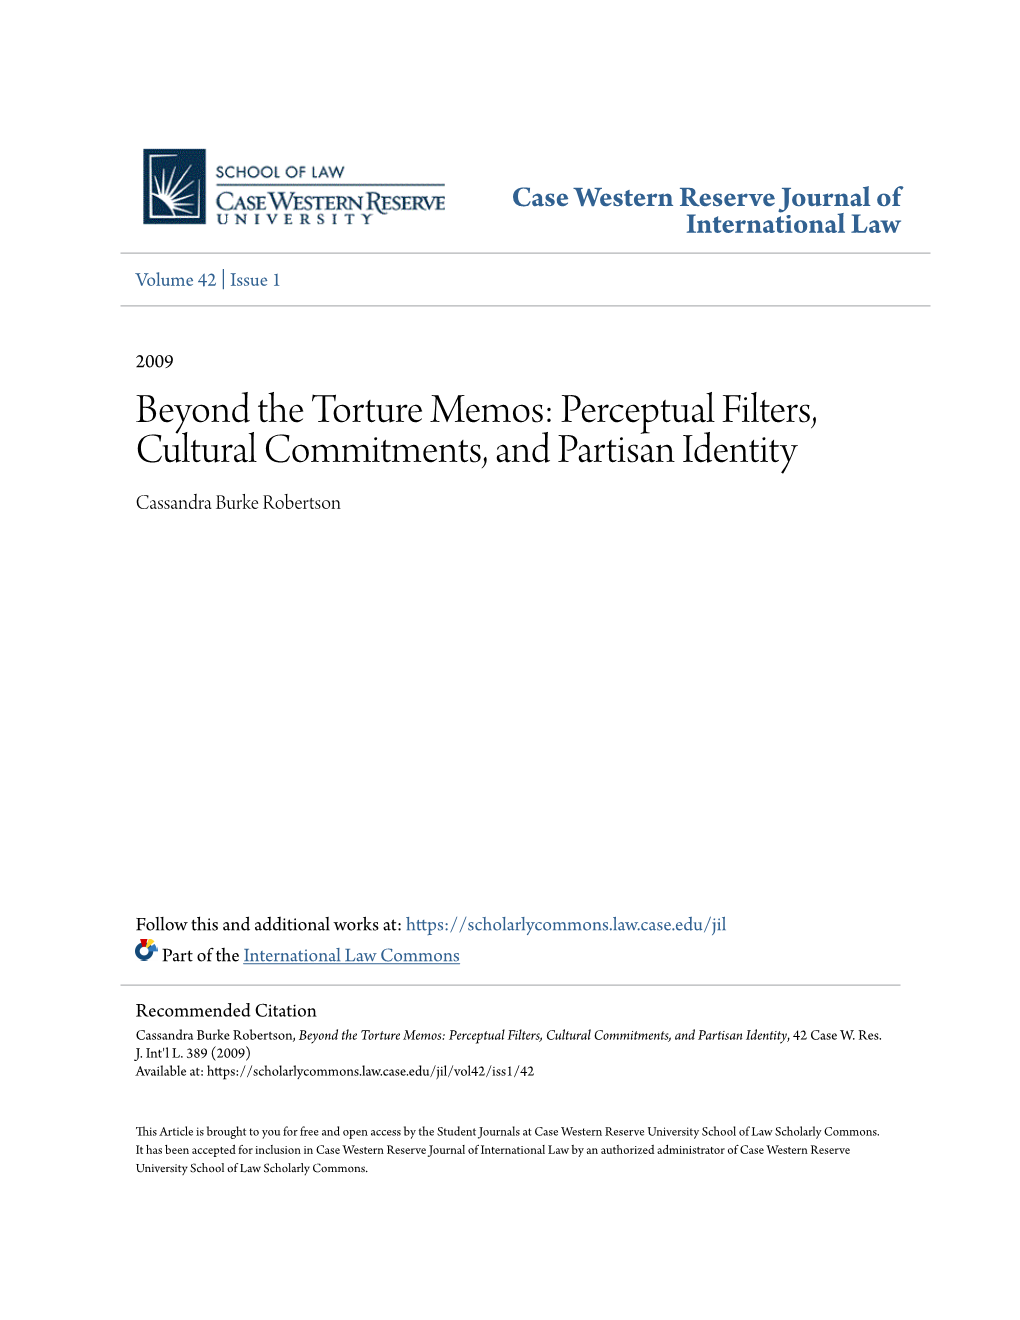 Beyond the Torture Memos: Perceptual Filters, Cultural Commitments, and Partisan Identity Cassandra Burke Robertson